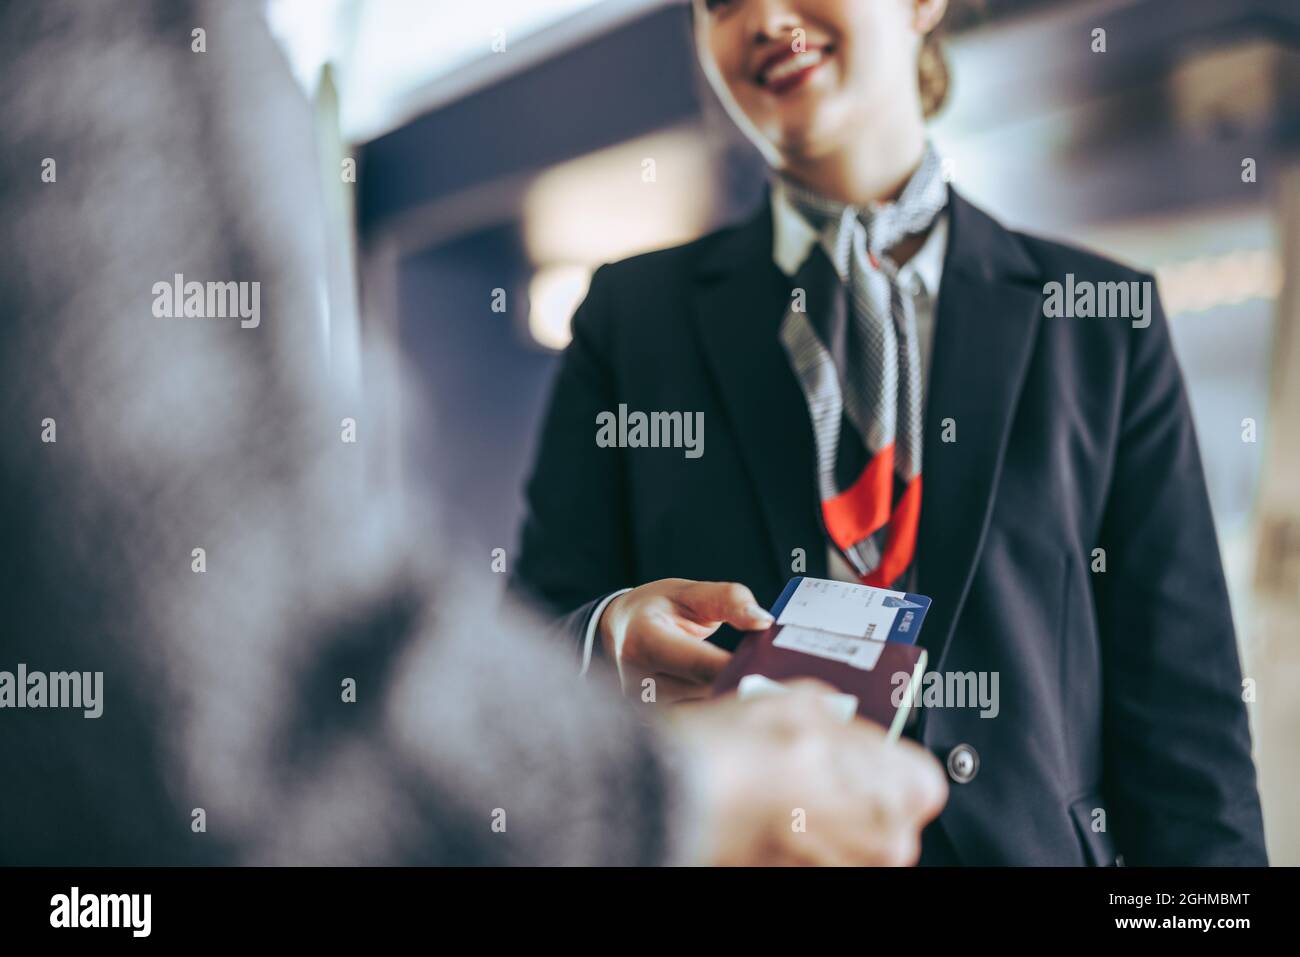 Cropped shot of airlines staff checking passenger at check-in counter. Flight attendant checking tourist boarding pass at airport. Stock Photo